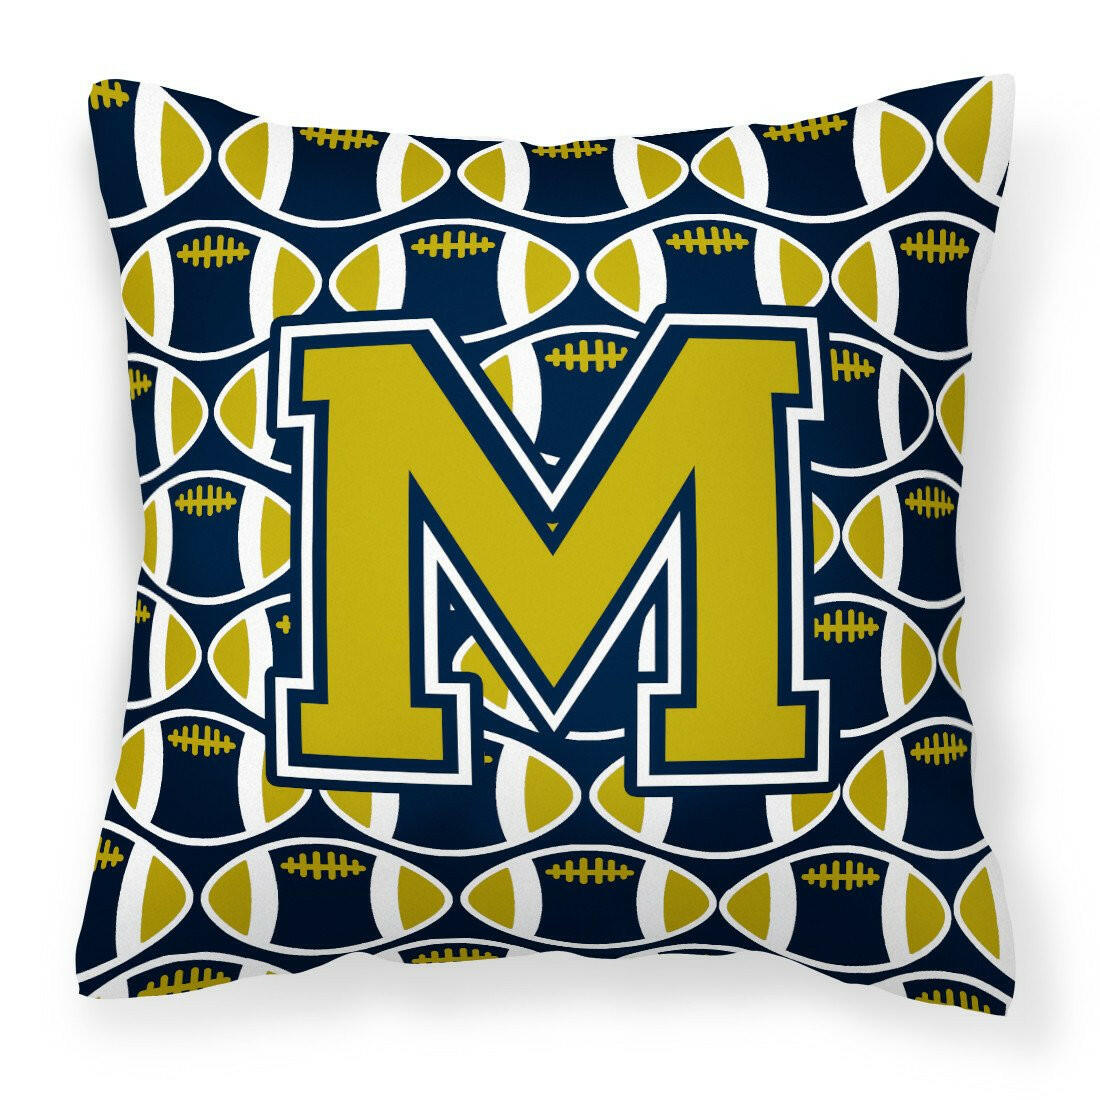 Letter M Football Blue and Gold Fabric Decorative Pillow CJ1074-MPW1414 by Caroline's Treasures